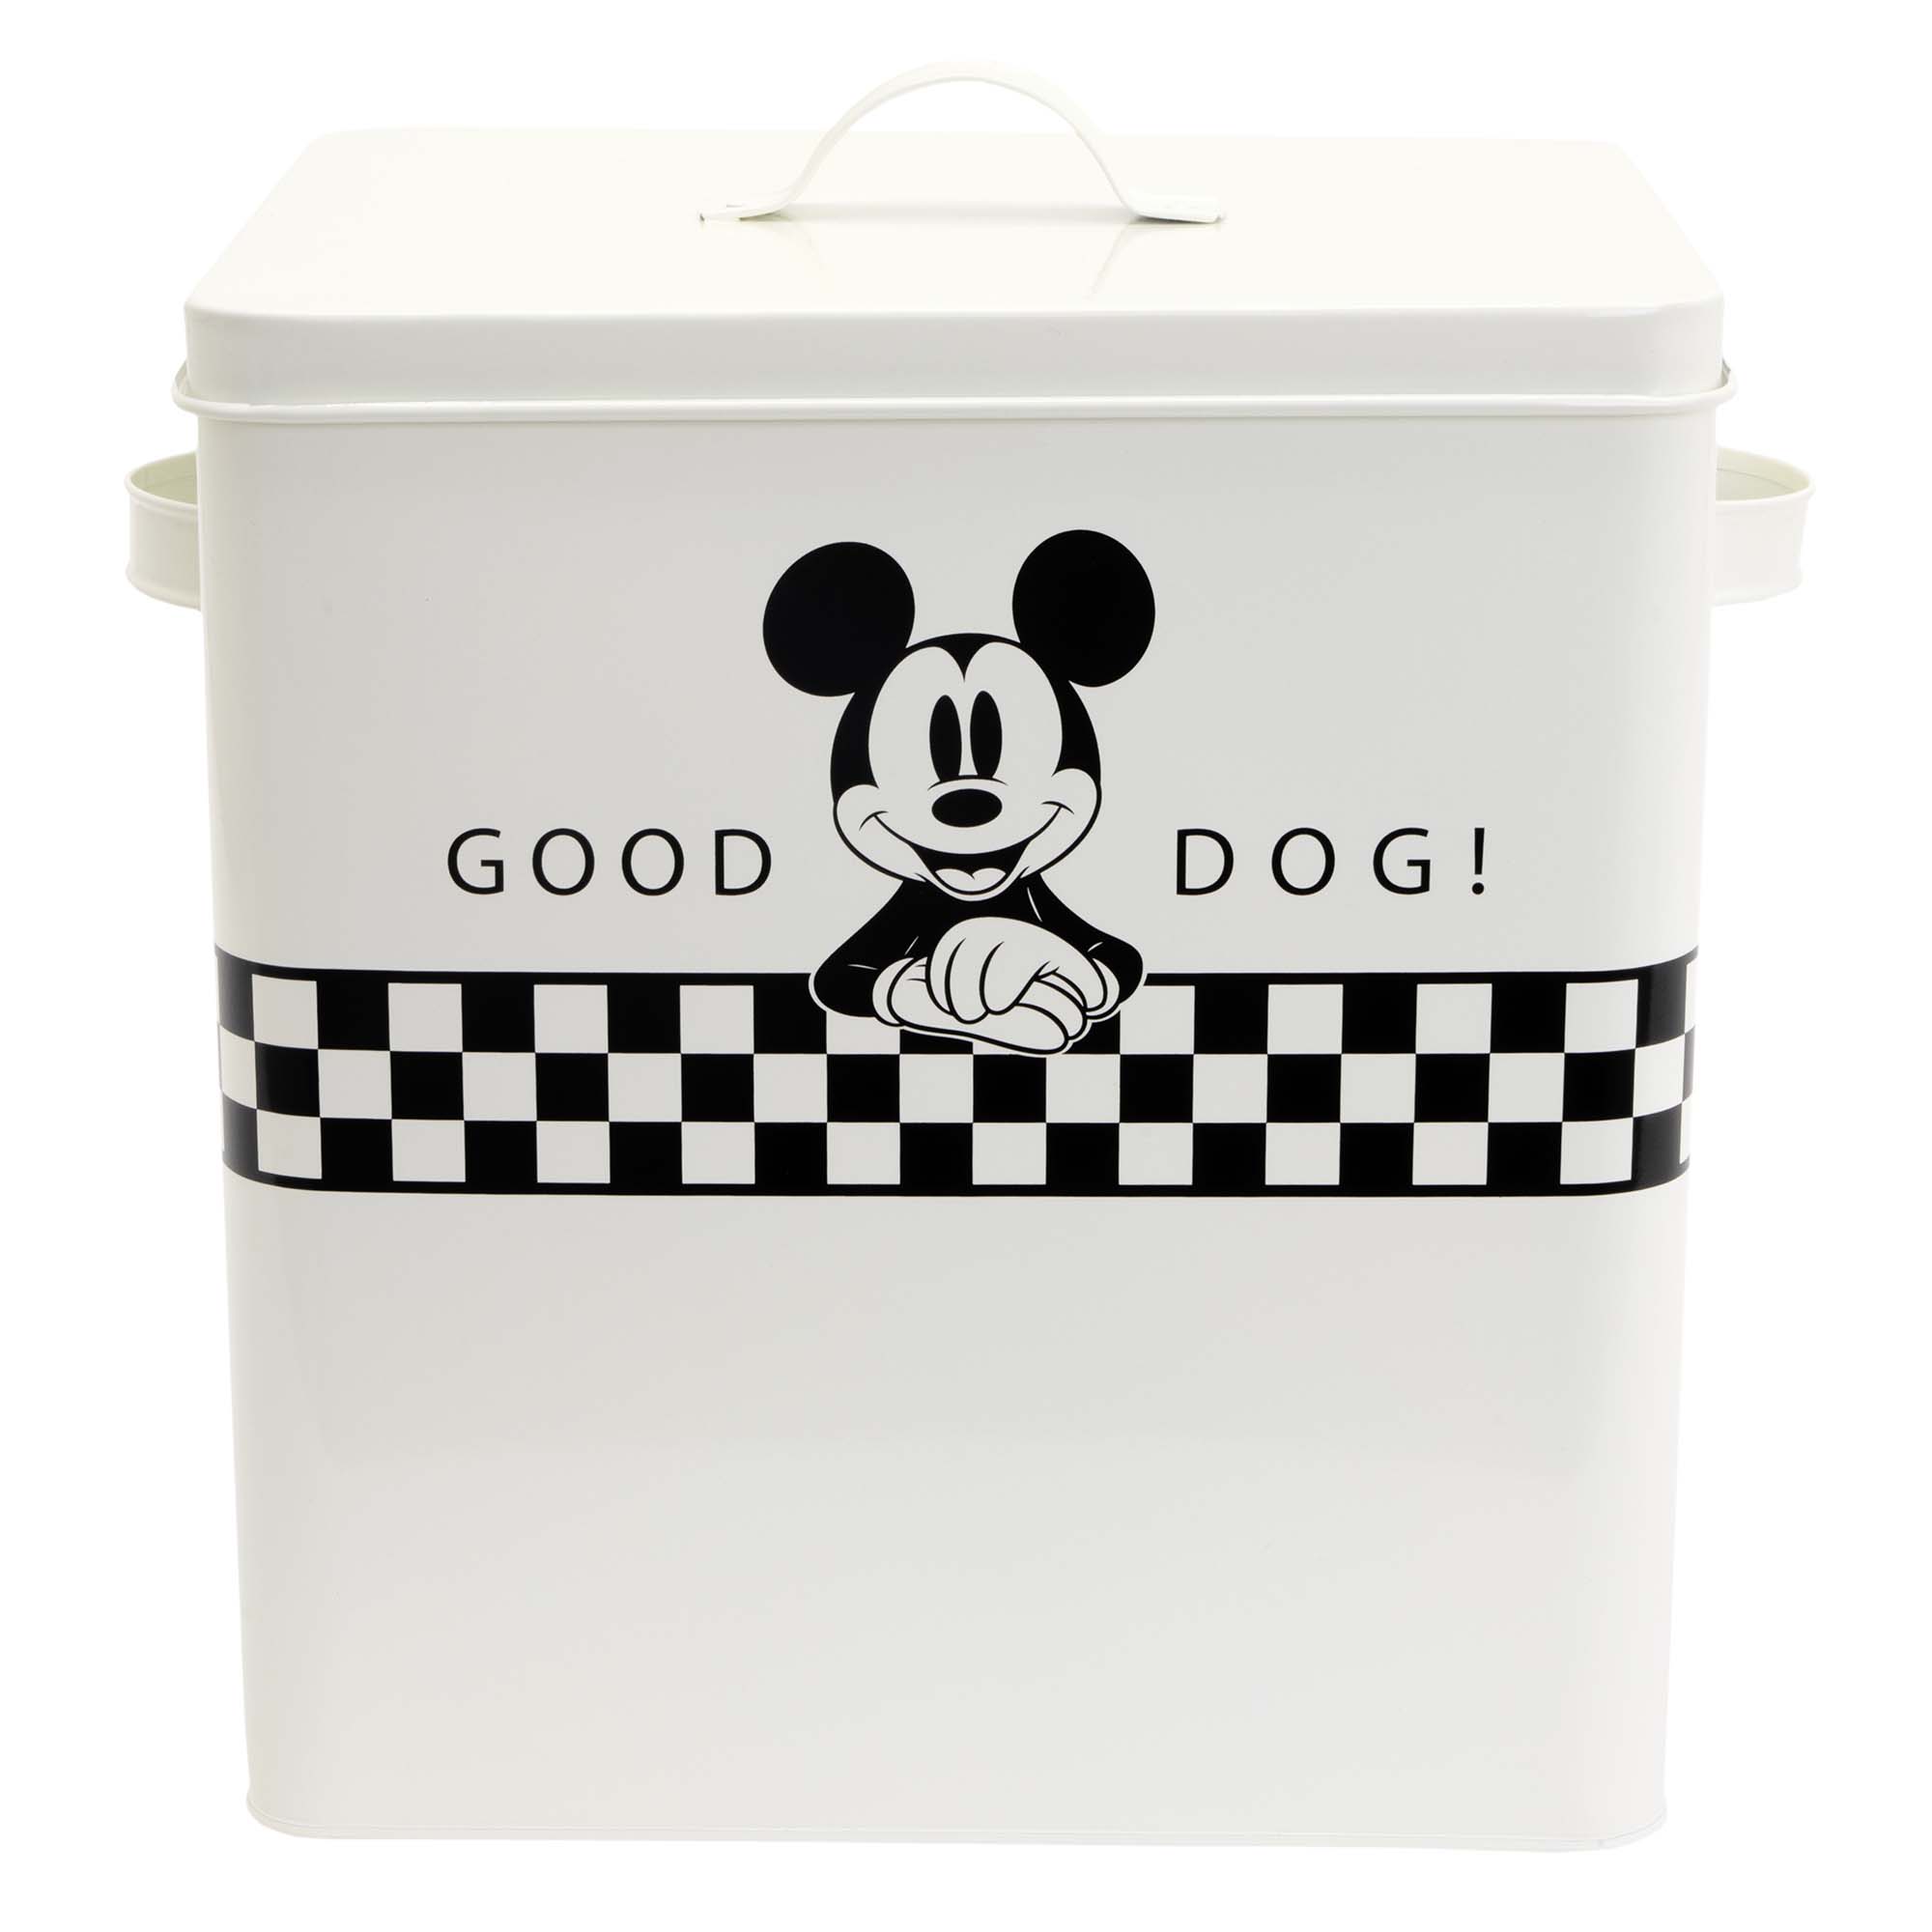 Harry Barker Classic Food Storage Container & Reviews